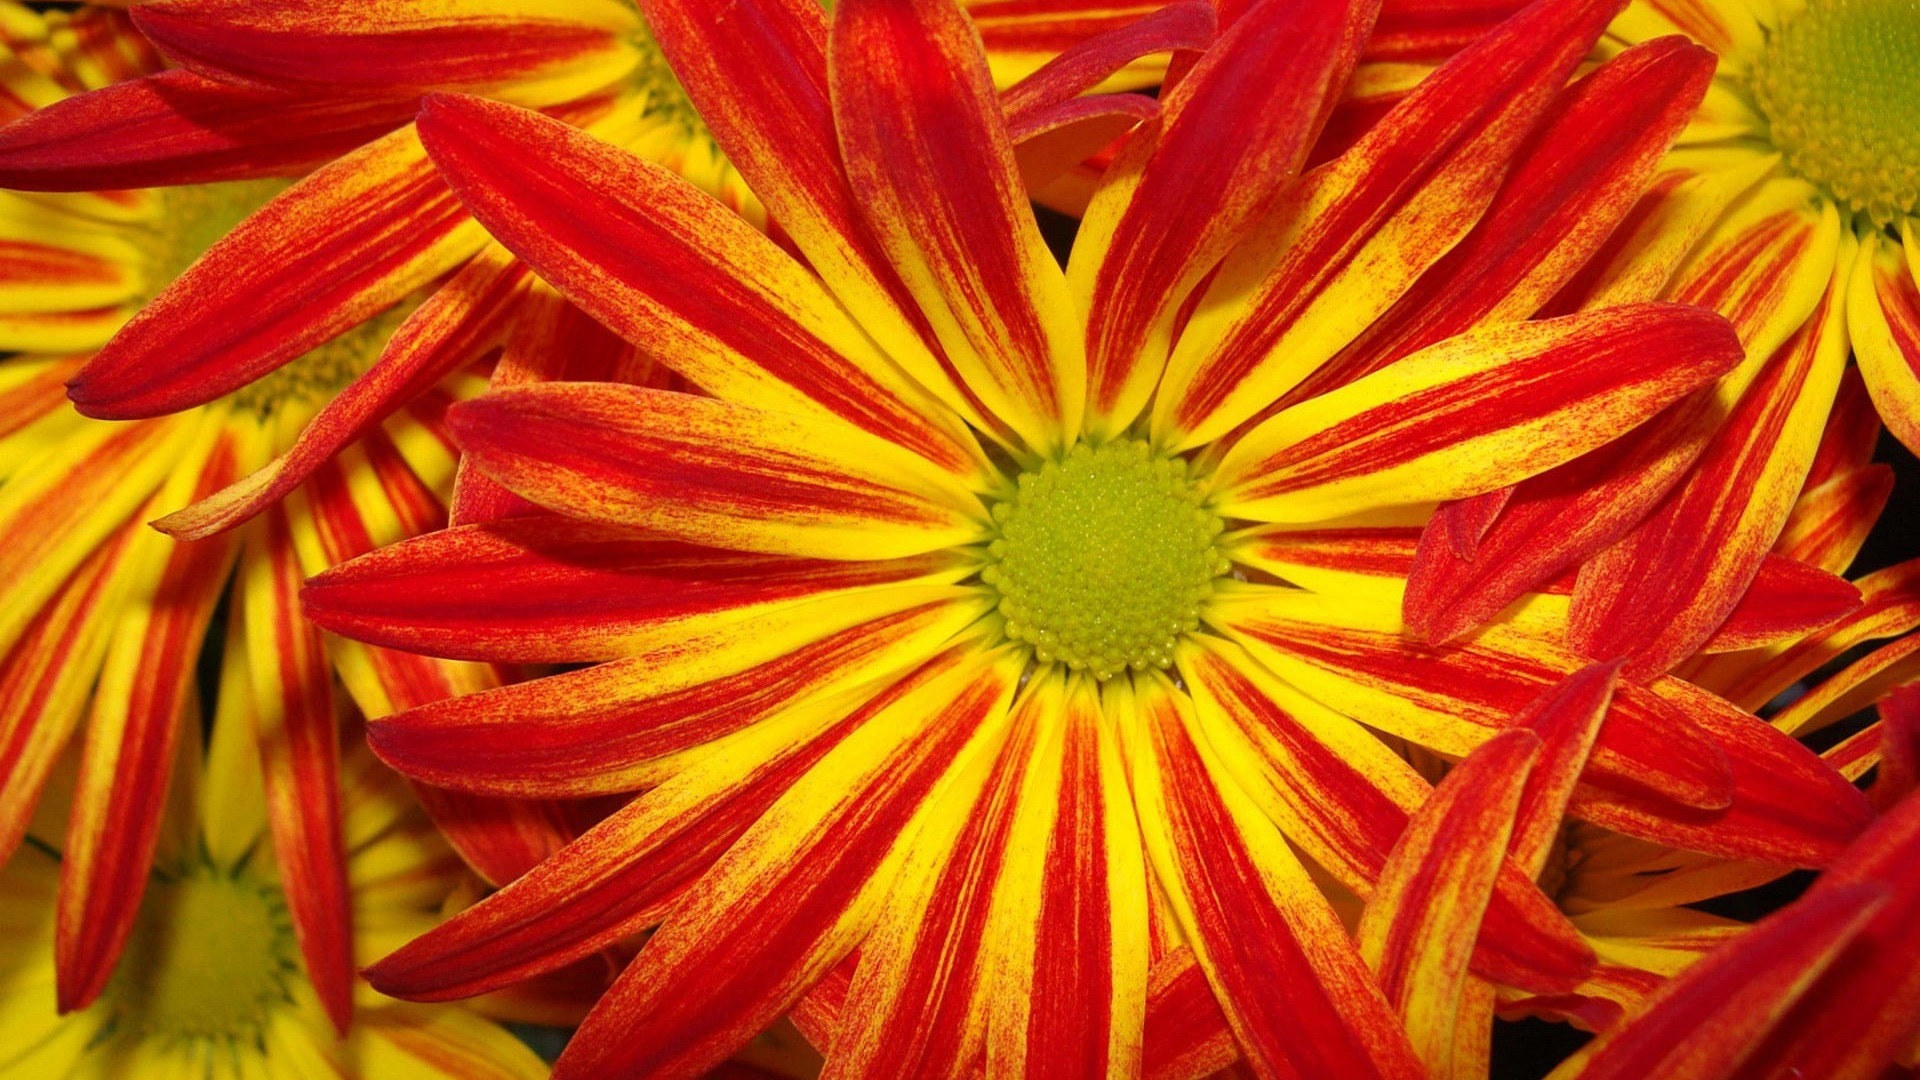 Red And Yellow Daisy Wallpaper